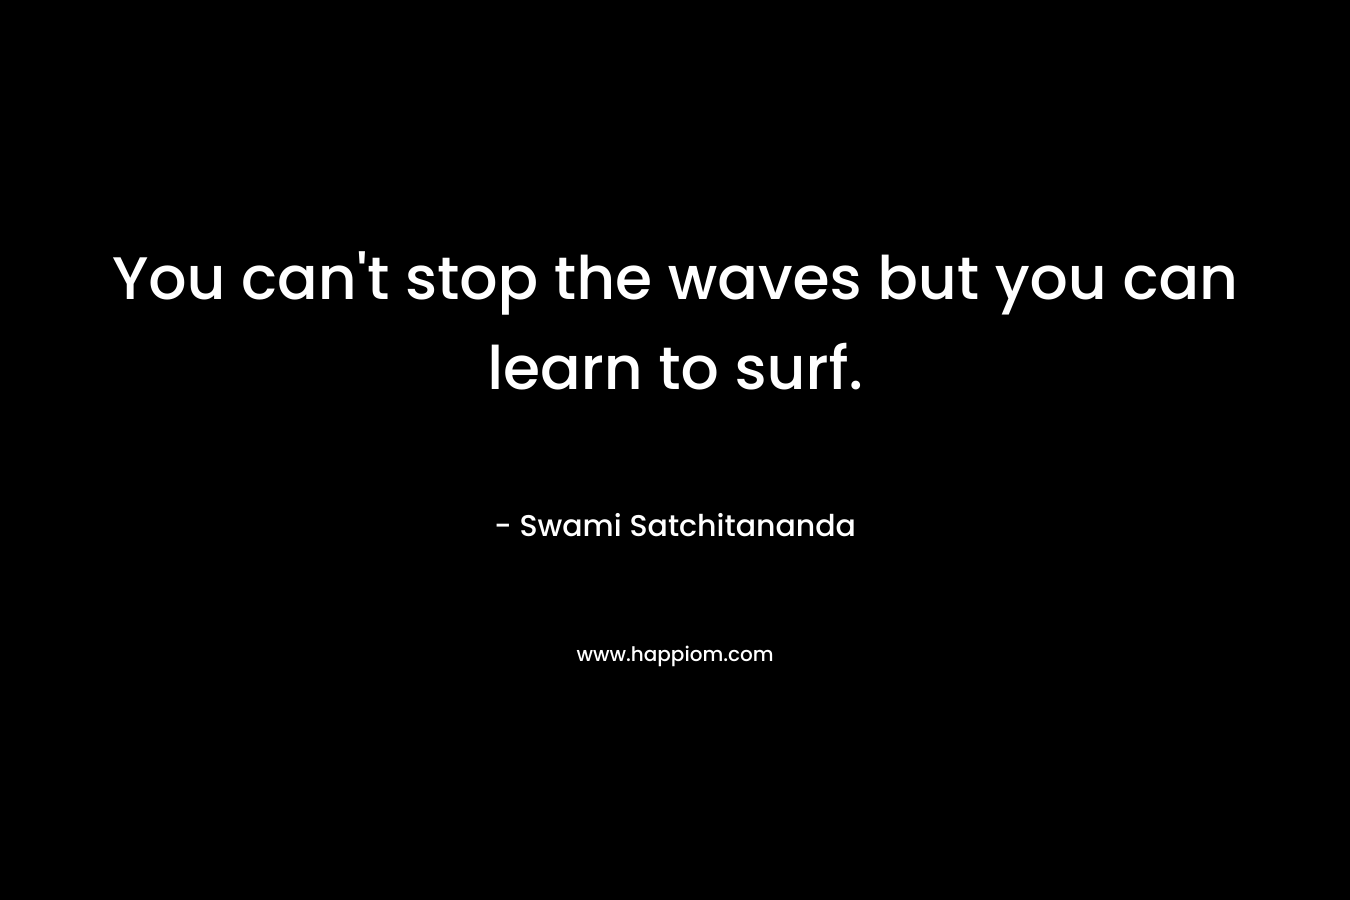 You can’t stop the waves but you can learn to surf. – Swami Satchitananda